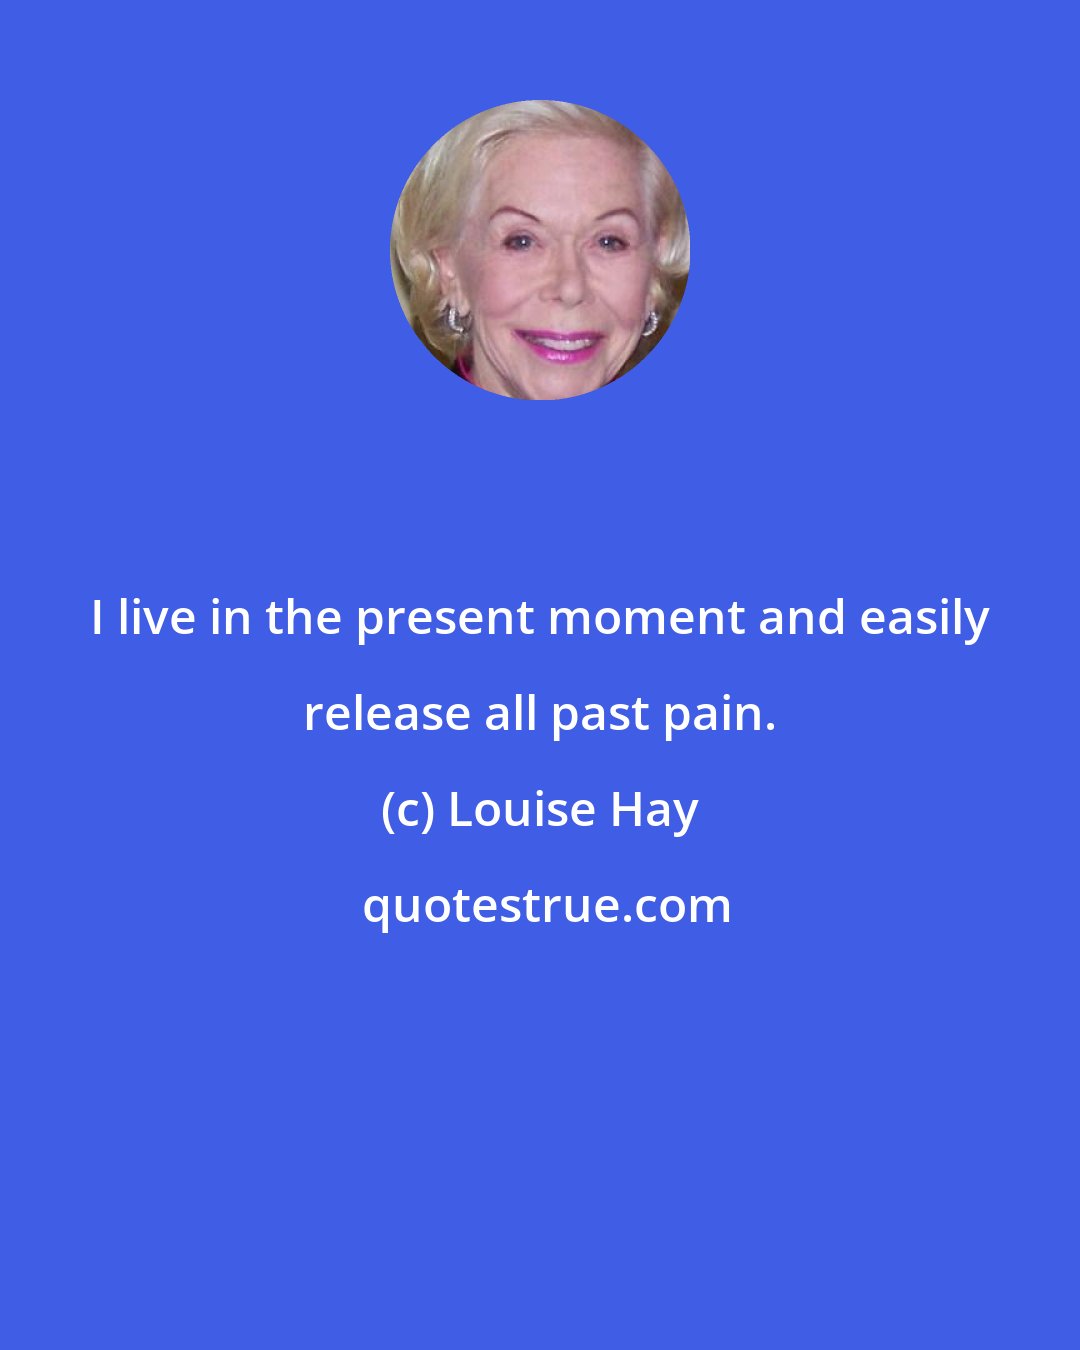 Louise Hay: I live in the present moment and easily release all past pain.